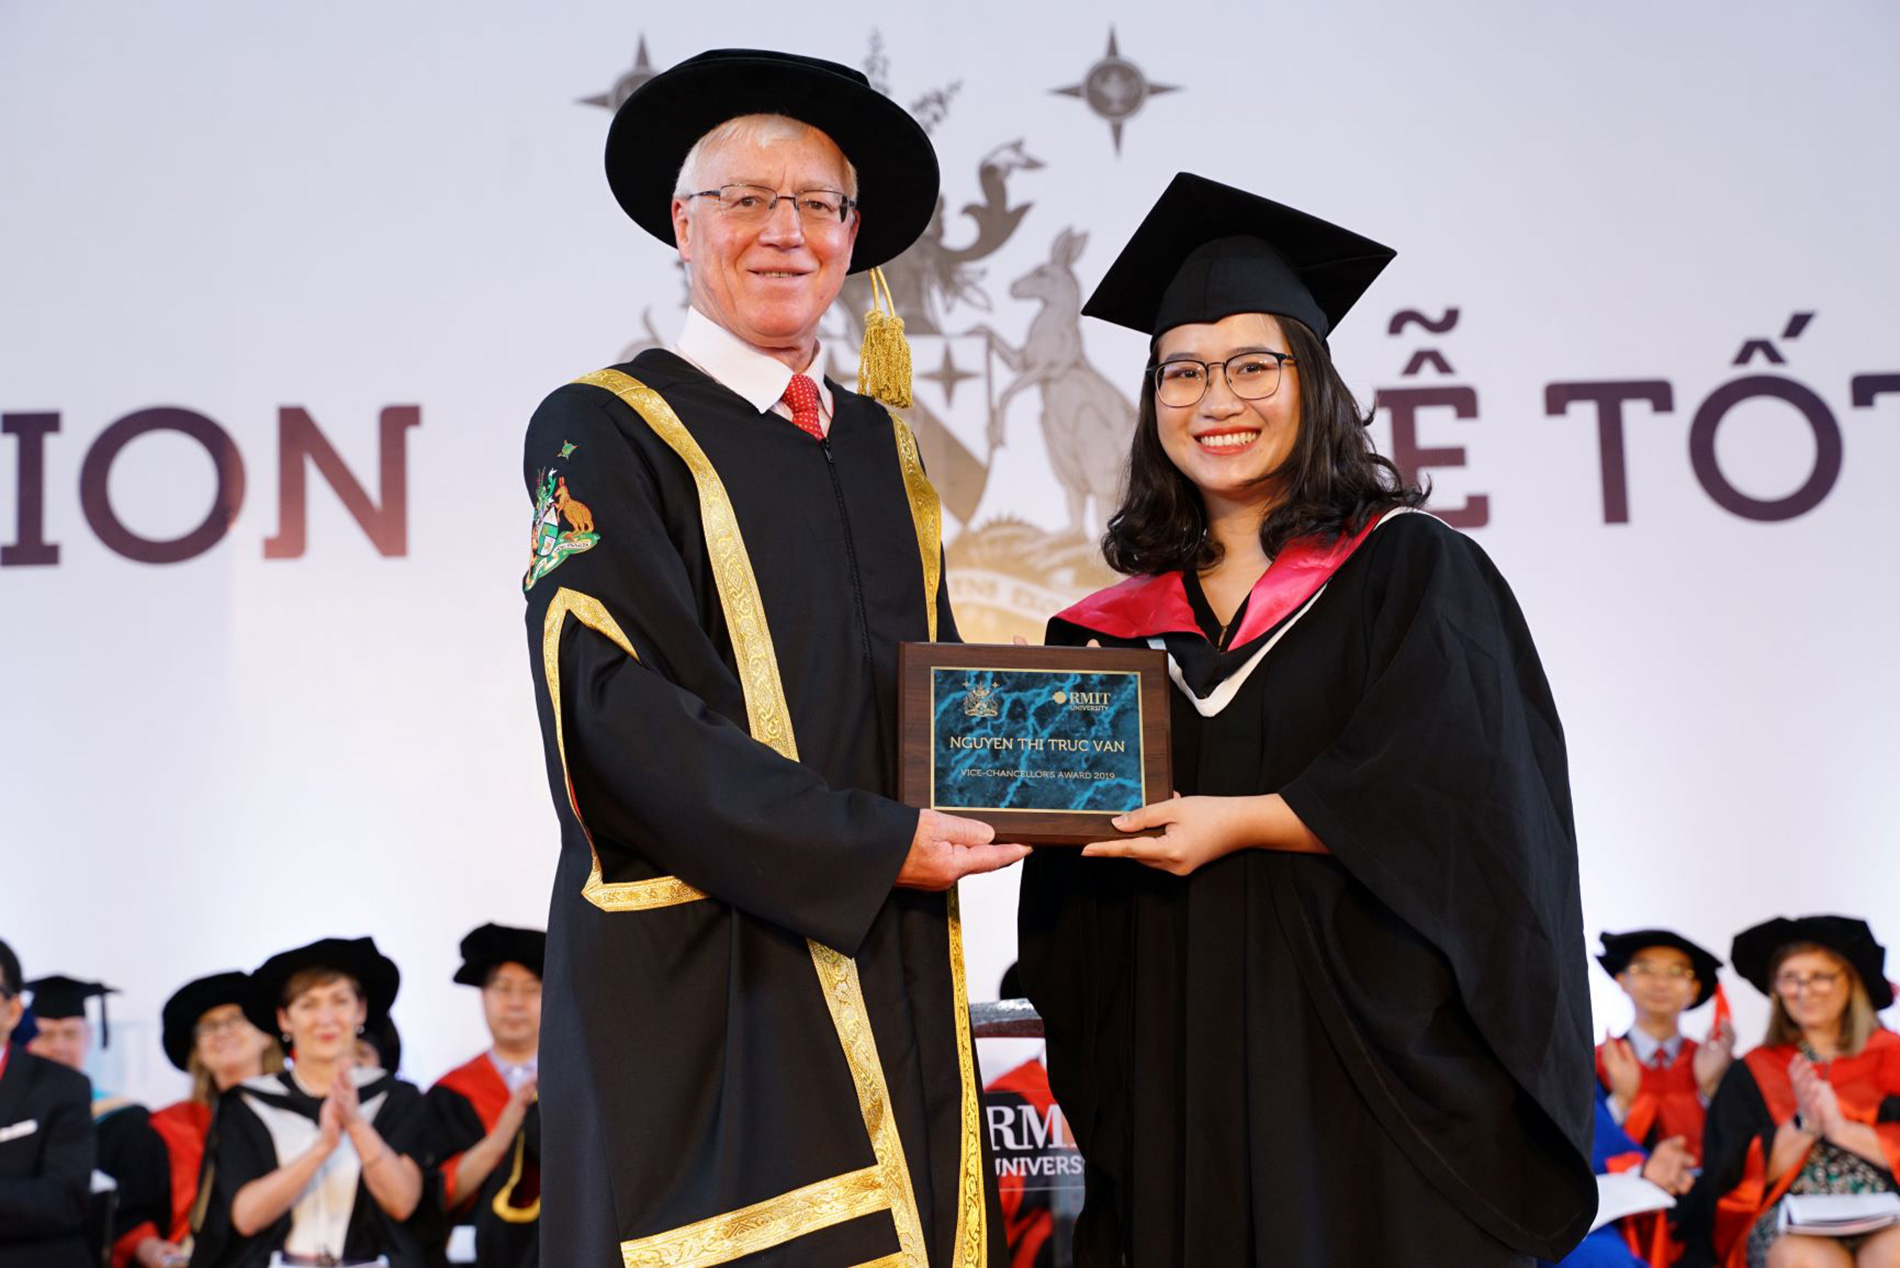 The Bachelor of Communication (Professional Communication) graduate from the Saigon South Campus Nguyen Thi Truc Van received the Vice-Chancellor’s Award for her outstanding achievements. 